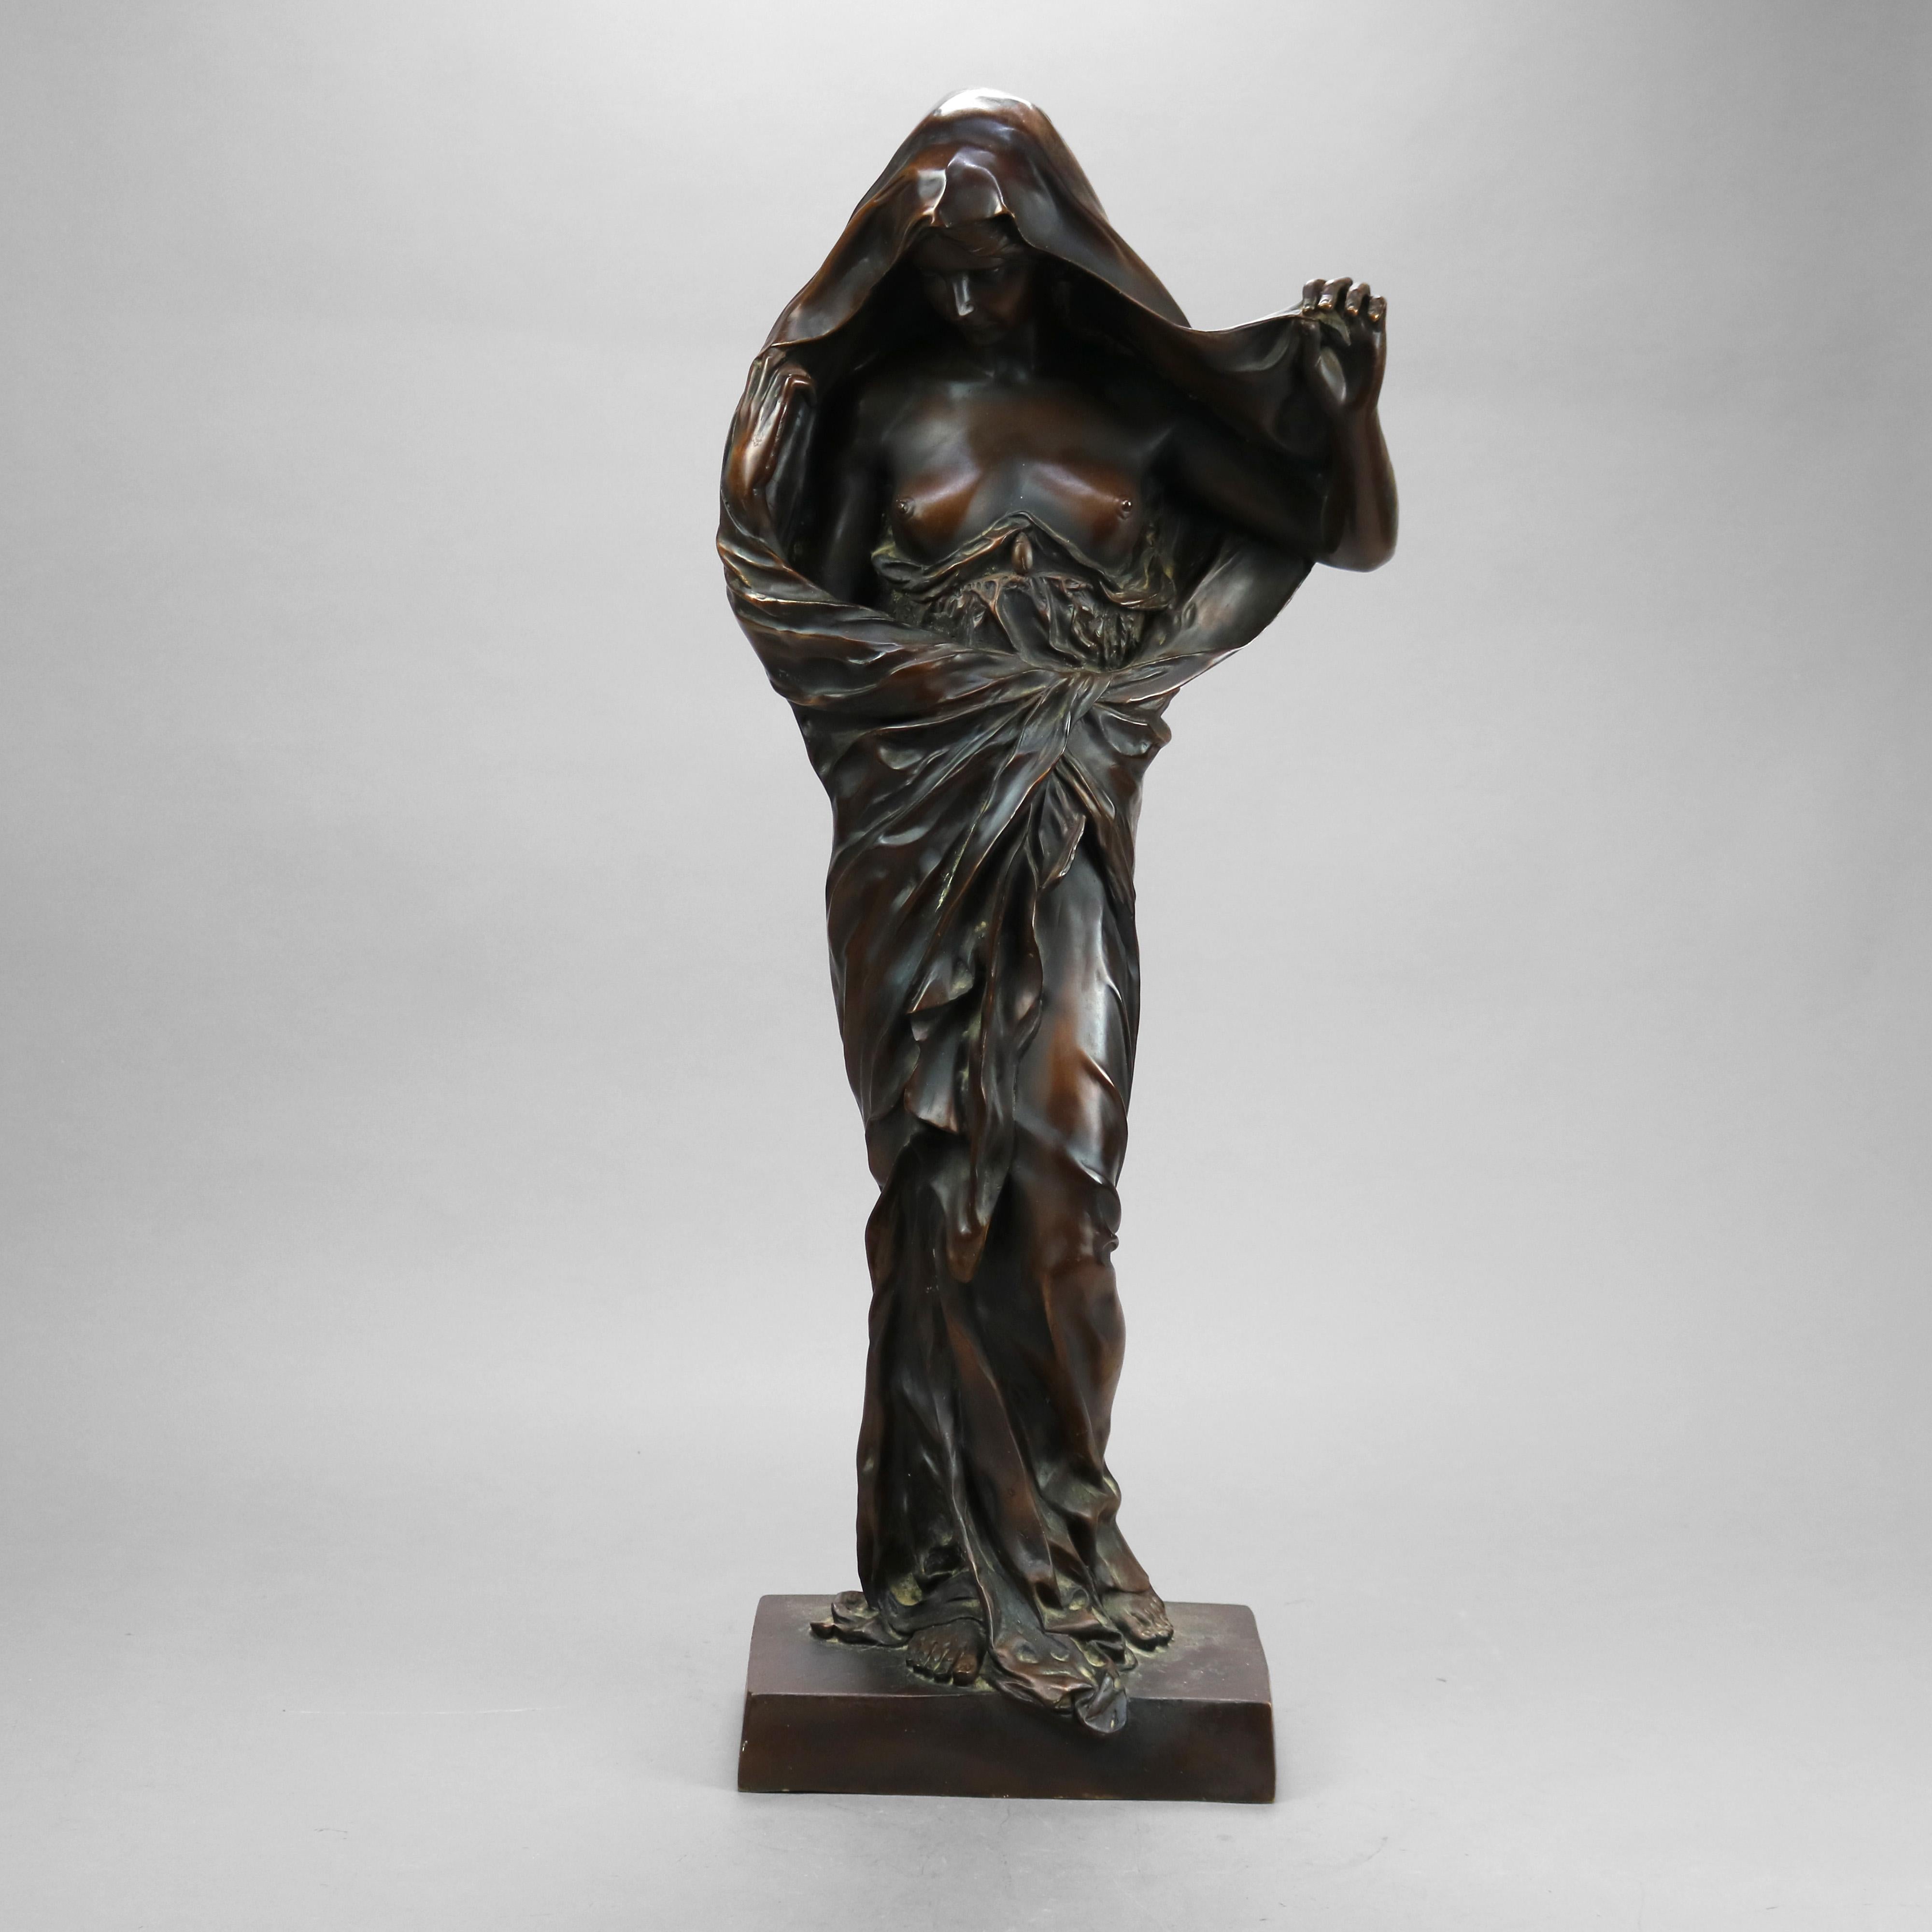 An antique and large Art Nouveau figural statue offers cast full figure partially nude Neoclassical female on plinth, artist signed illegible as photographed, 19th century

Measures - 30.5'' H x 9.75'' W x 6.5'' D.